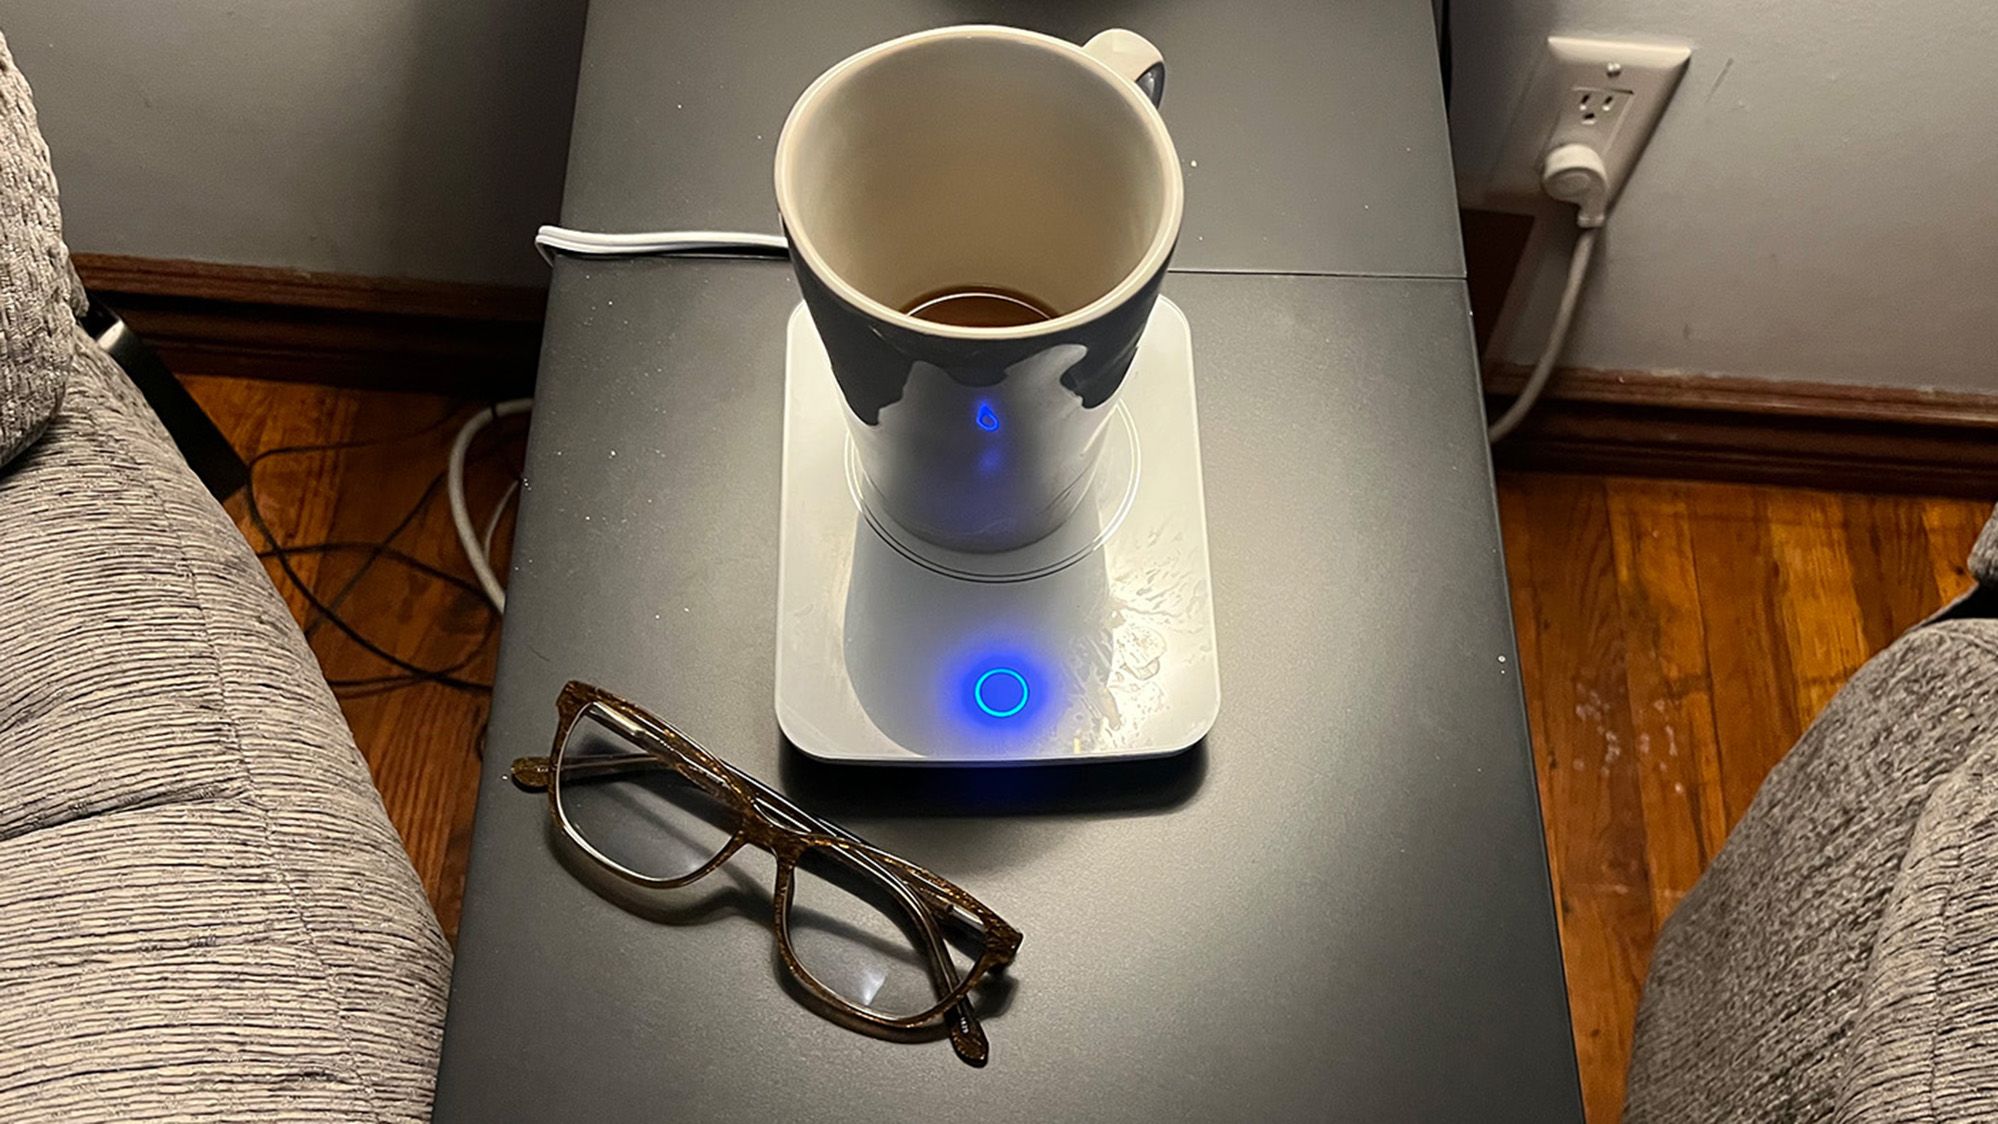 Electric Mug Warmer for Coffee and Tea, Easy to Transport Beverage Warmer,  Use at Home or at The Office, Mug is Not Included